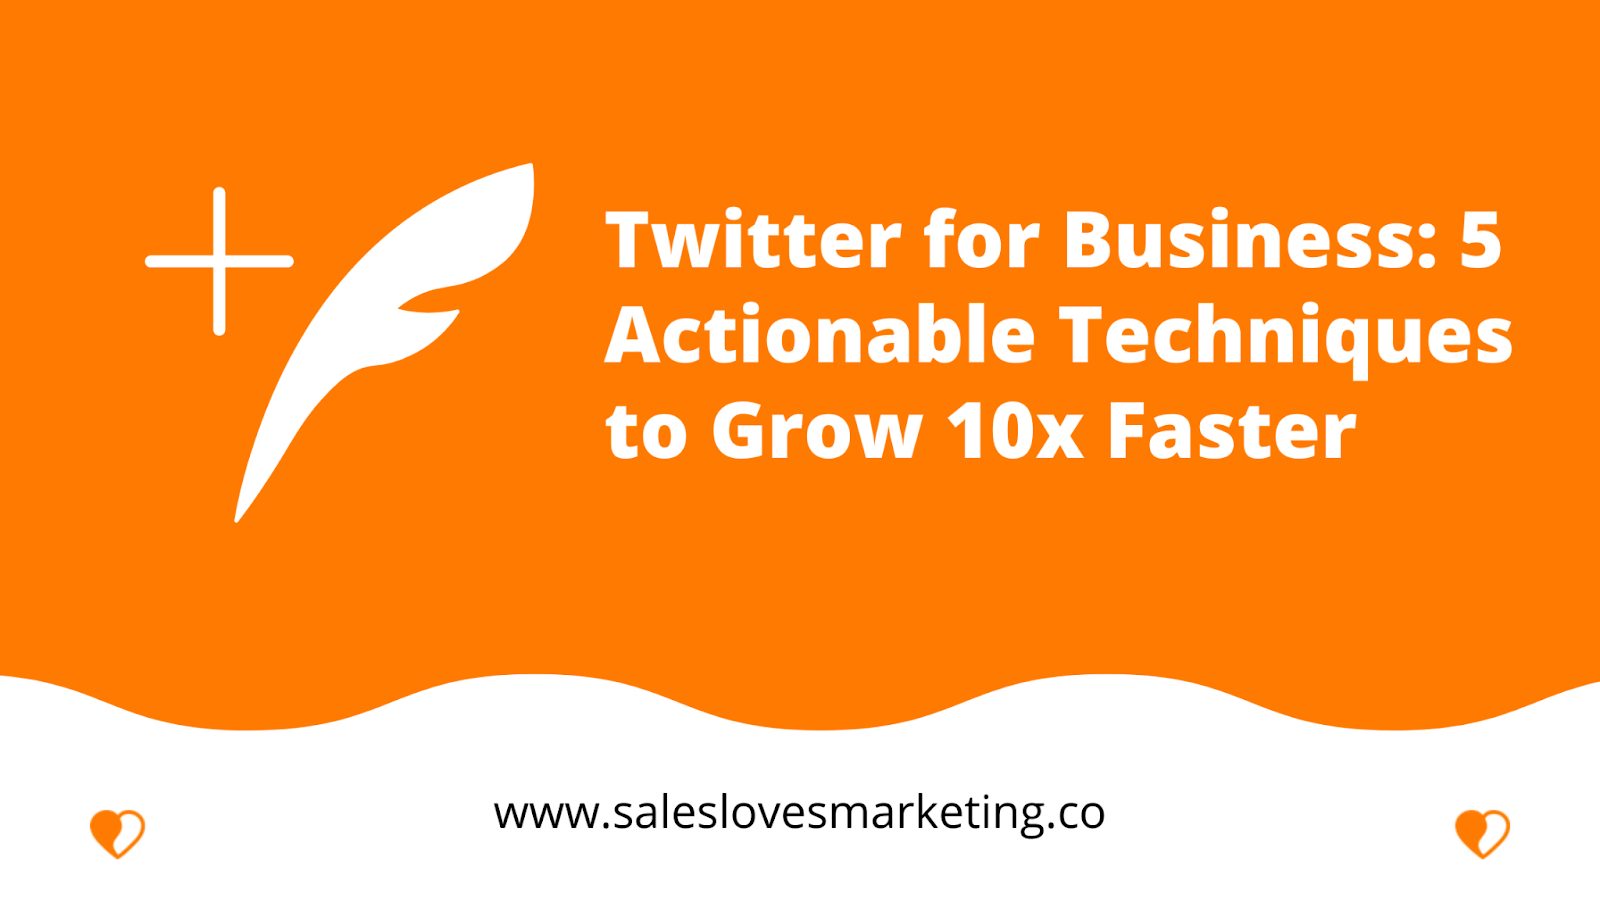 Twitter for Business: 5 Actionable Techniques to Grow 10x Faster